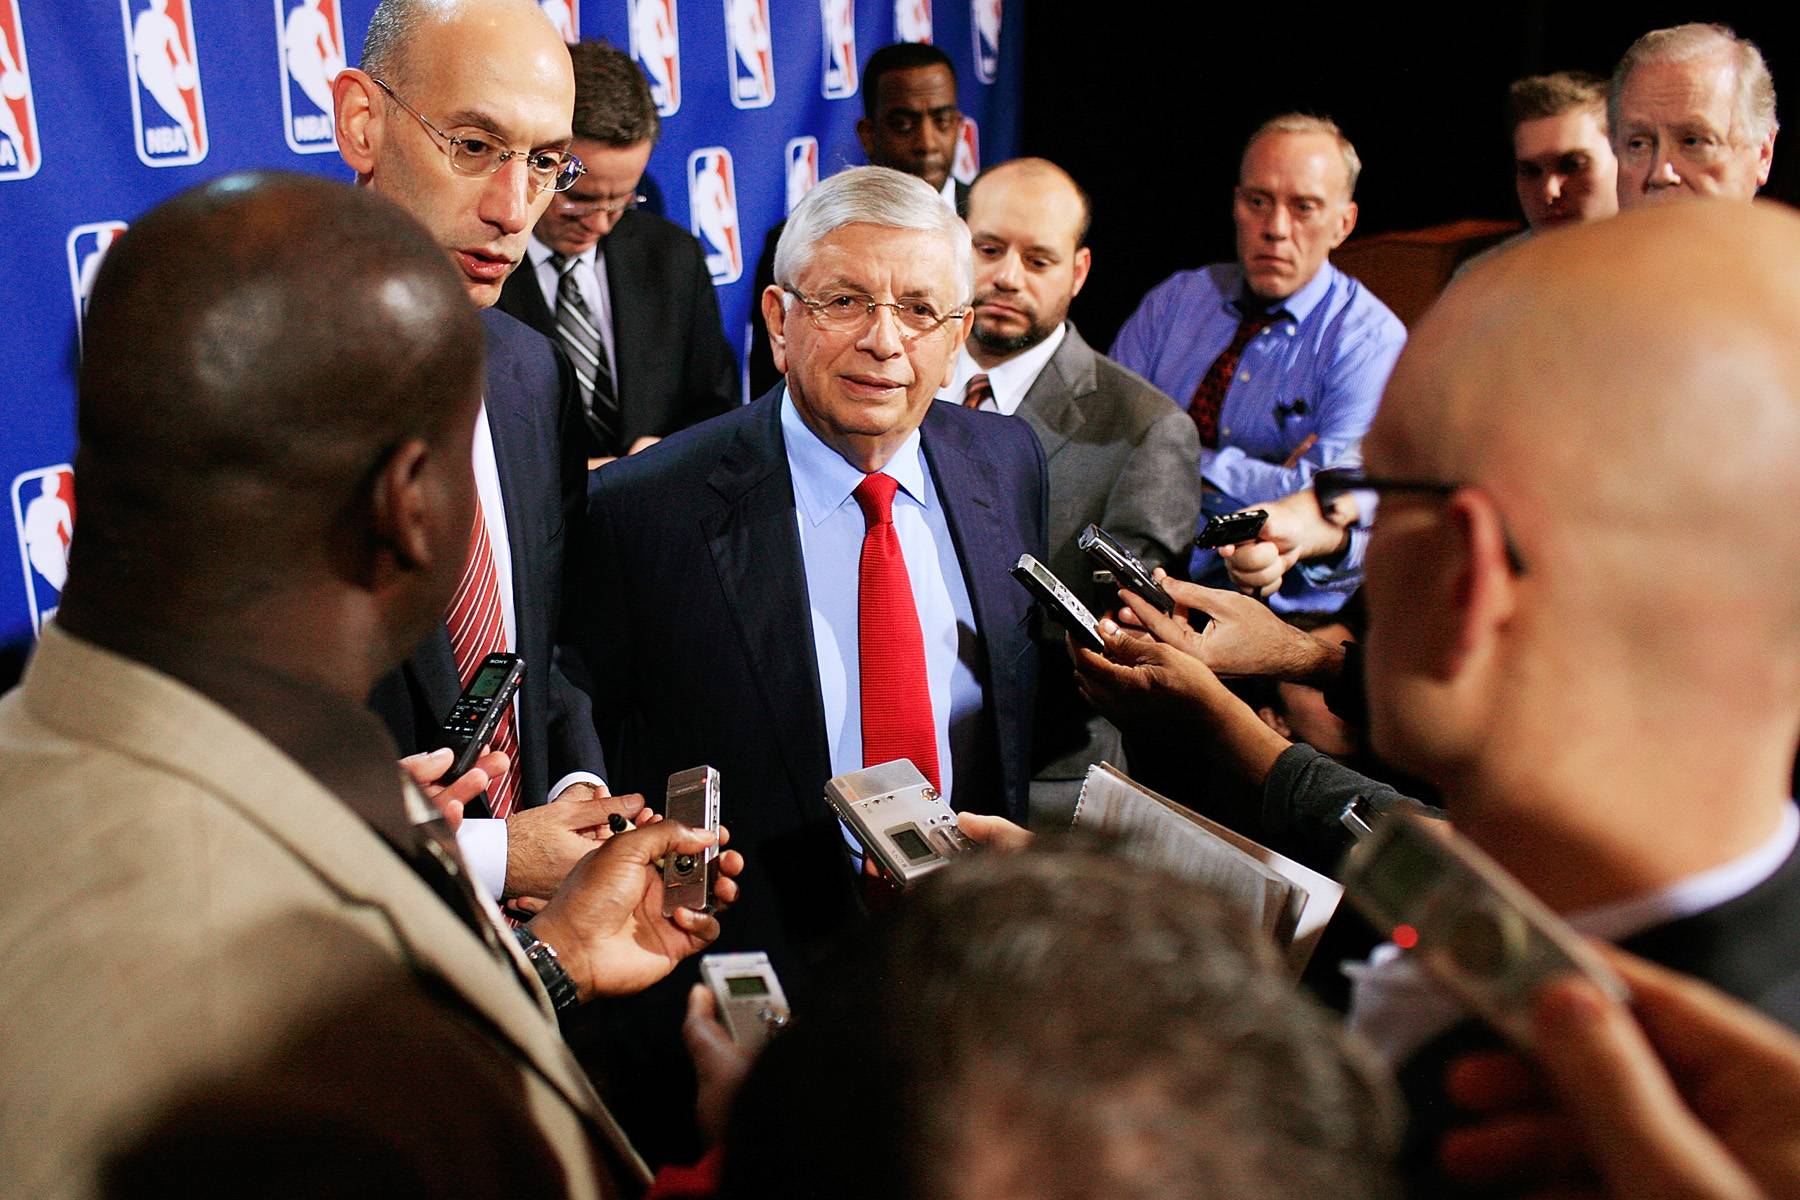 NBA players, fans celebrate end of lockout 